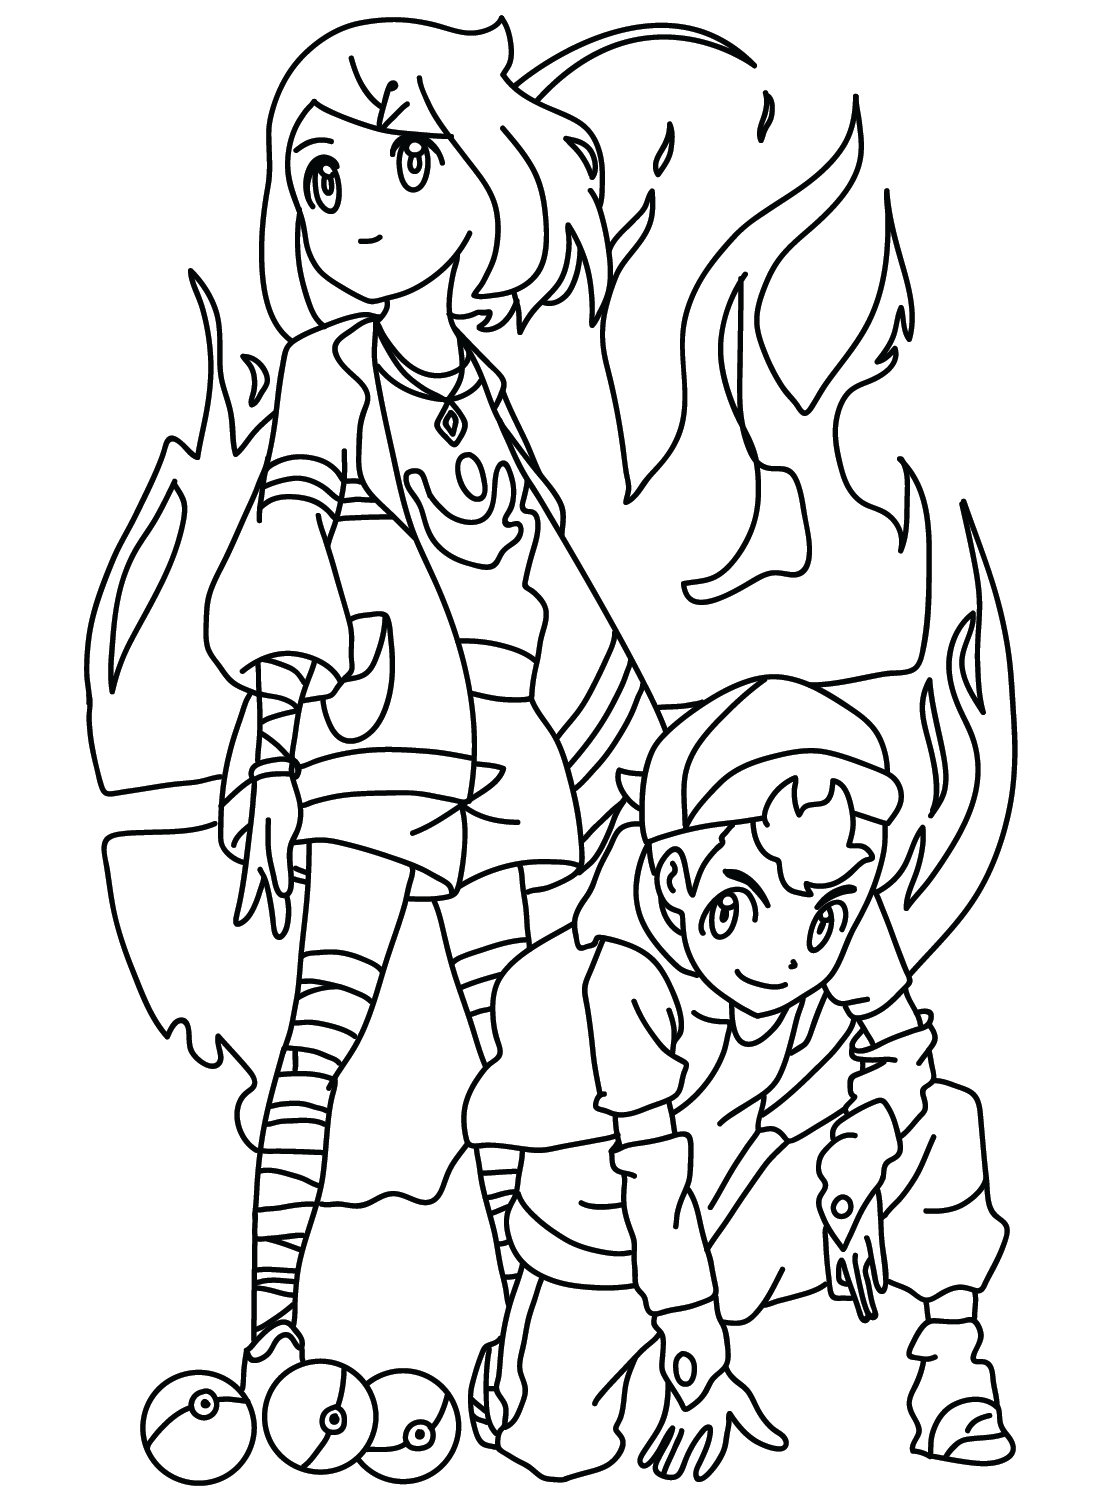 Liko and Roy Pokemon Coloring Page from Liko Pokemon